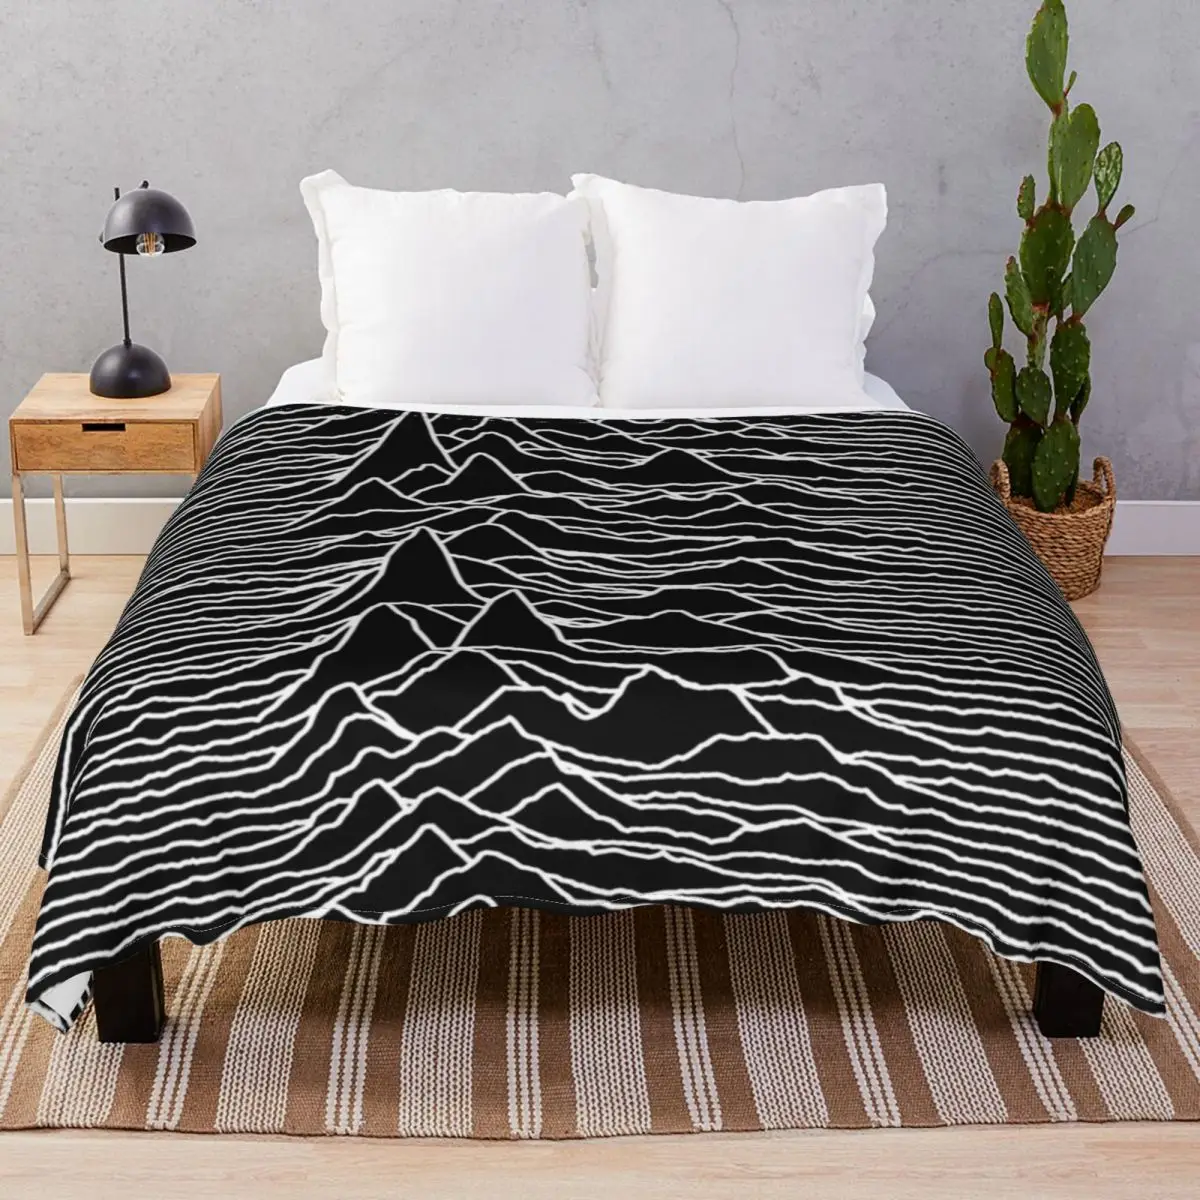 Unknown Pleasures Blanket Fleece Textile Decor Ultra-Soft Throw Blankets for Bed Home Couch Camp Office